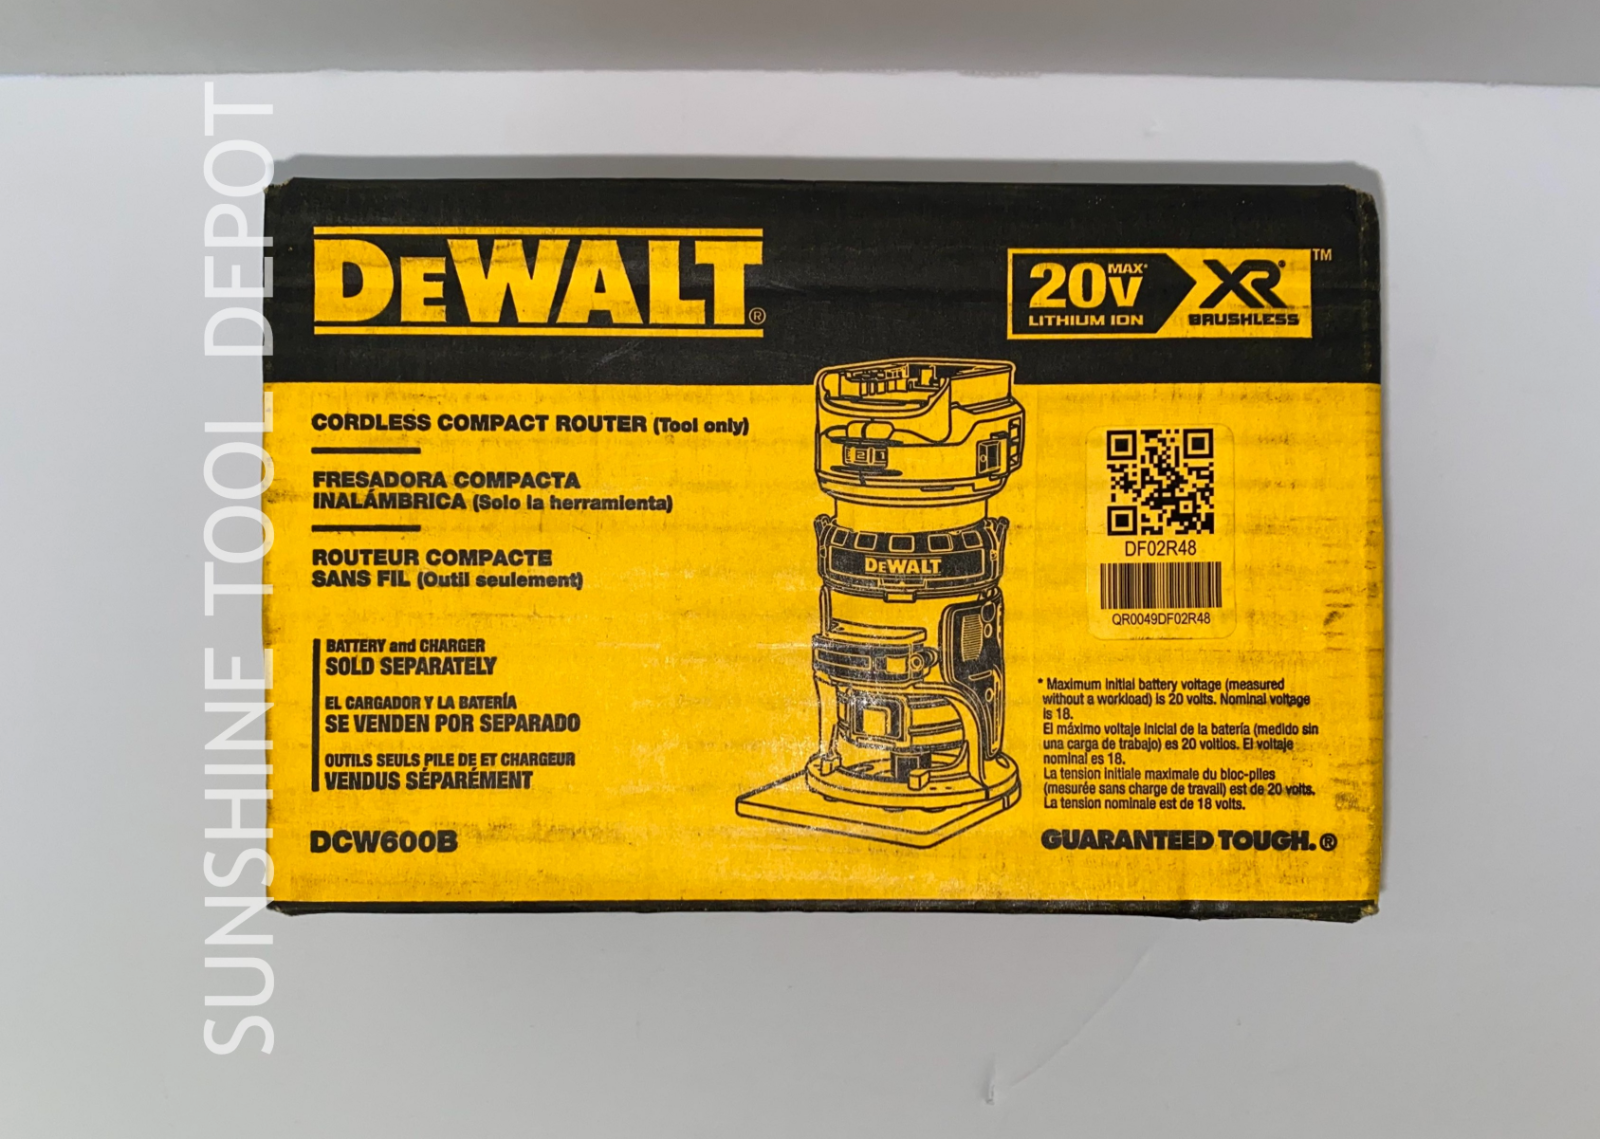 Dewalt Dcw600b 20v Max Xr® Brushless Cordless Compact Router